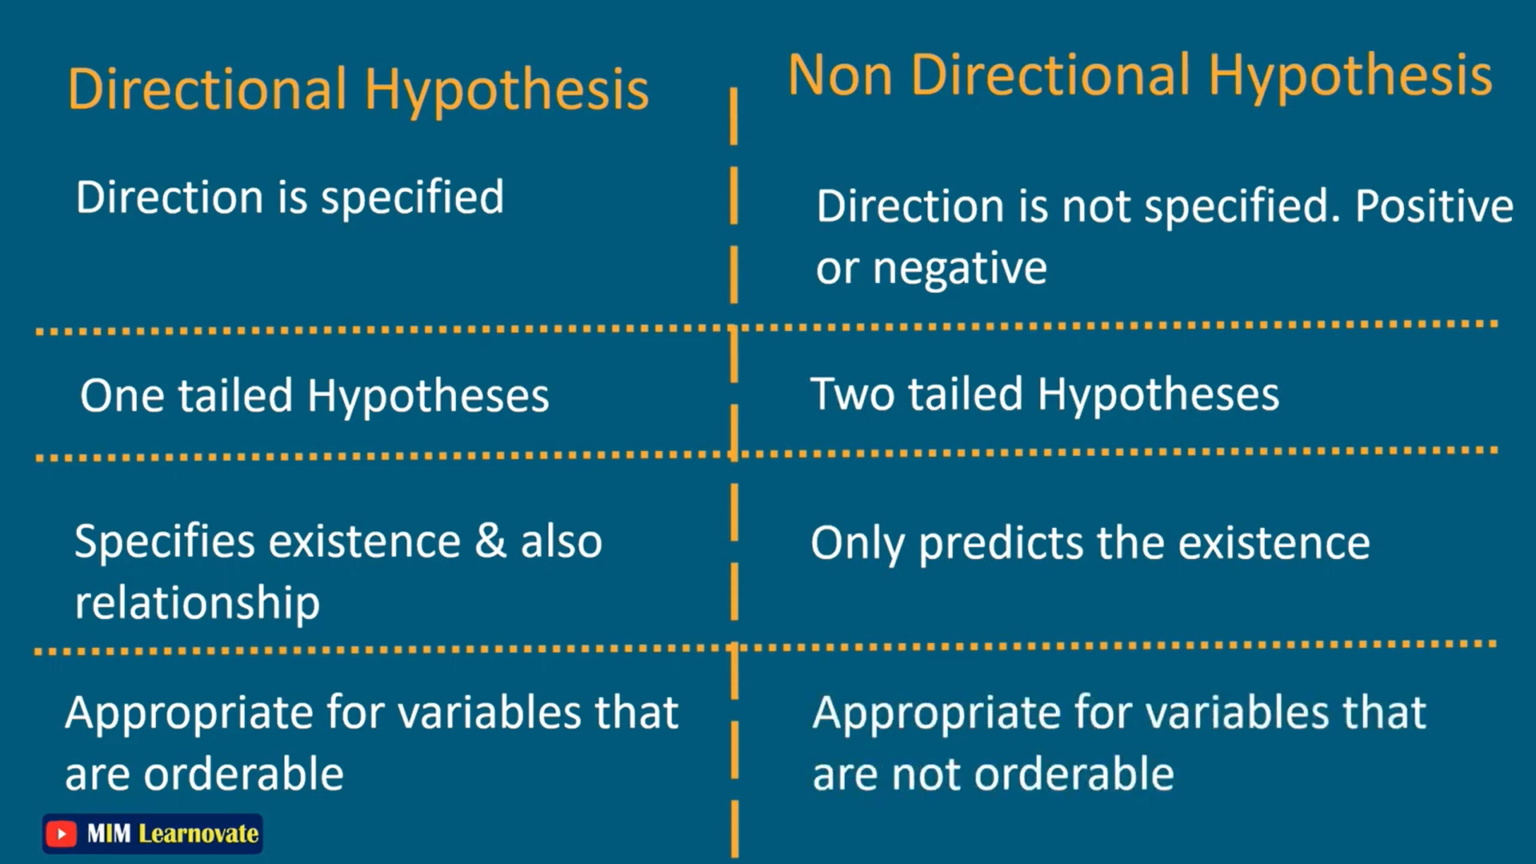 a non directional alternative hypothesis claims that no difference